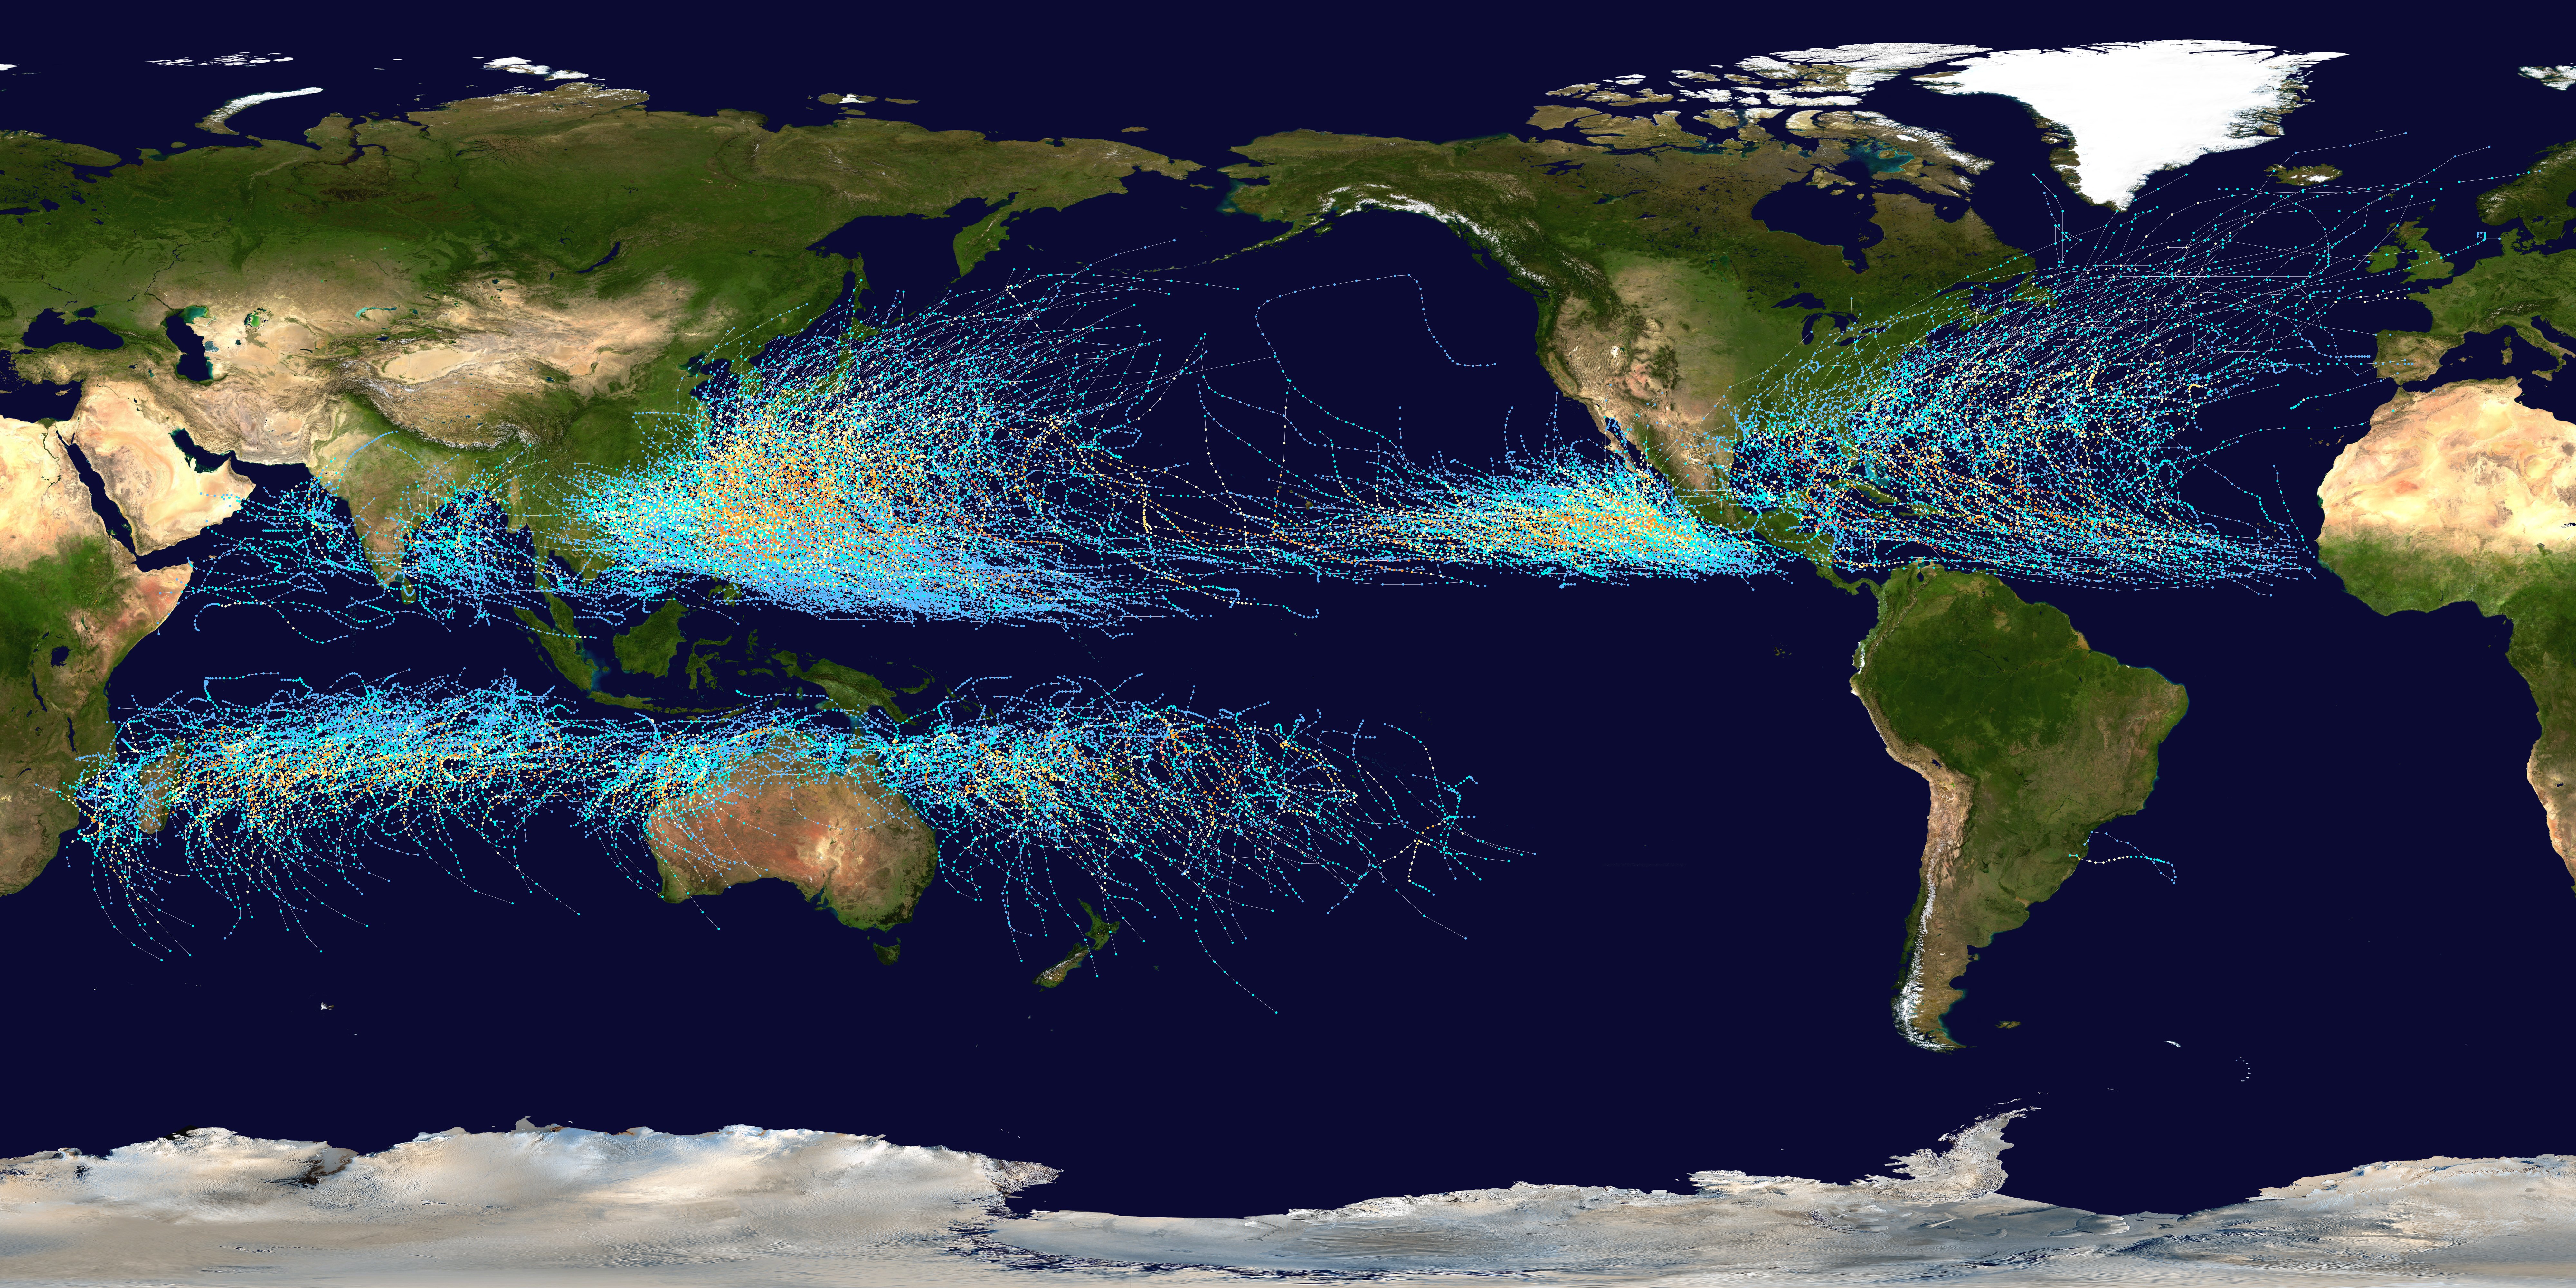 Global Tropical Cyclone Tracks between 1985 and 2005, indicating the areas where tropical cyclones usually develop. (Illustration: NASA)